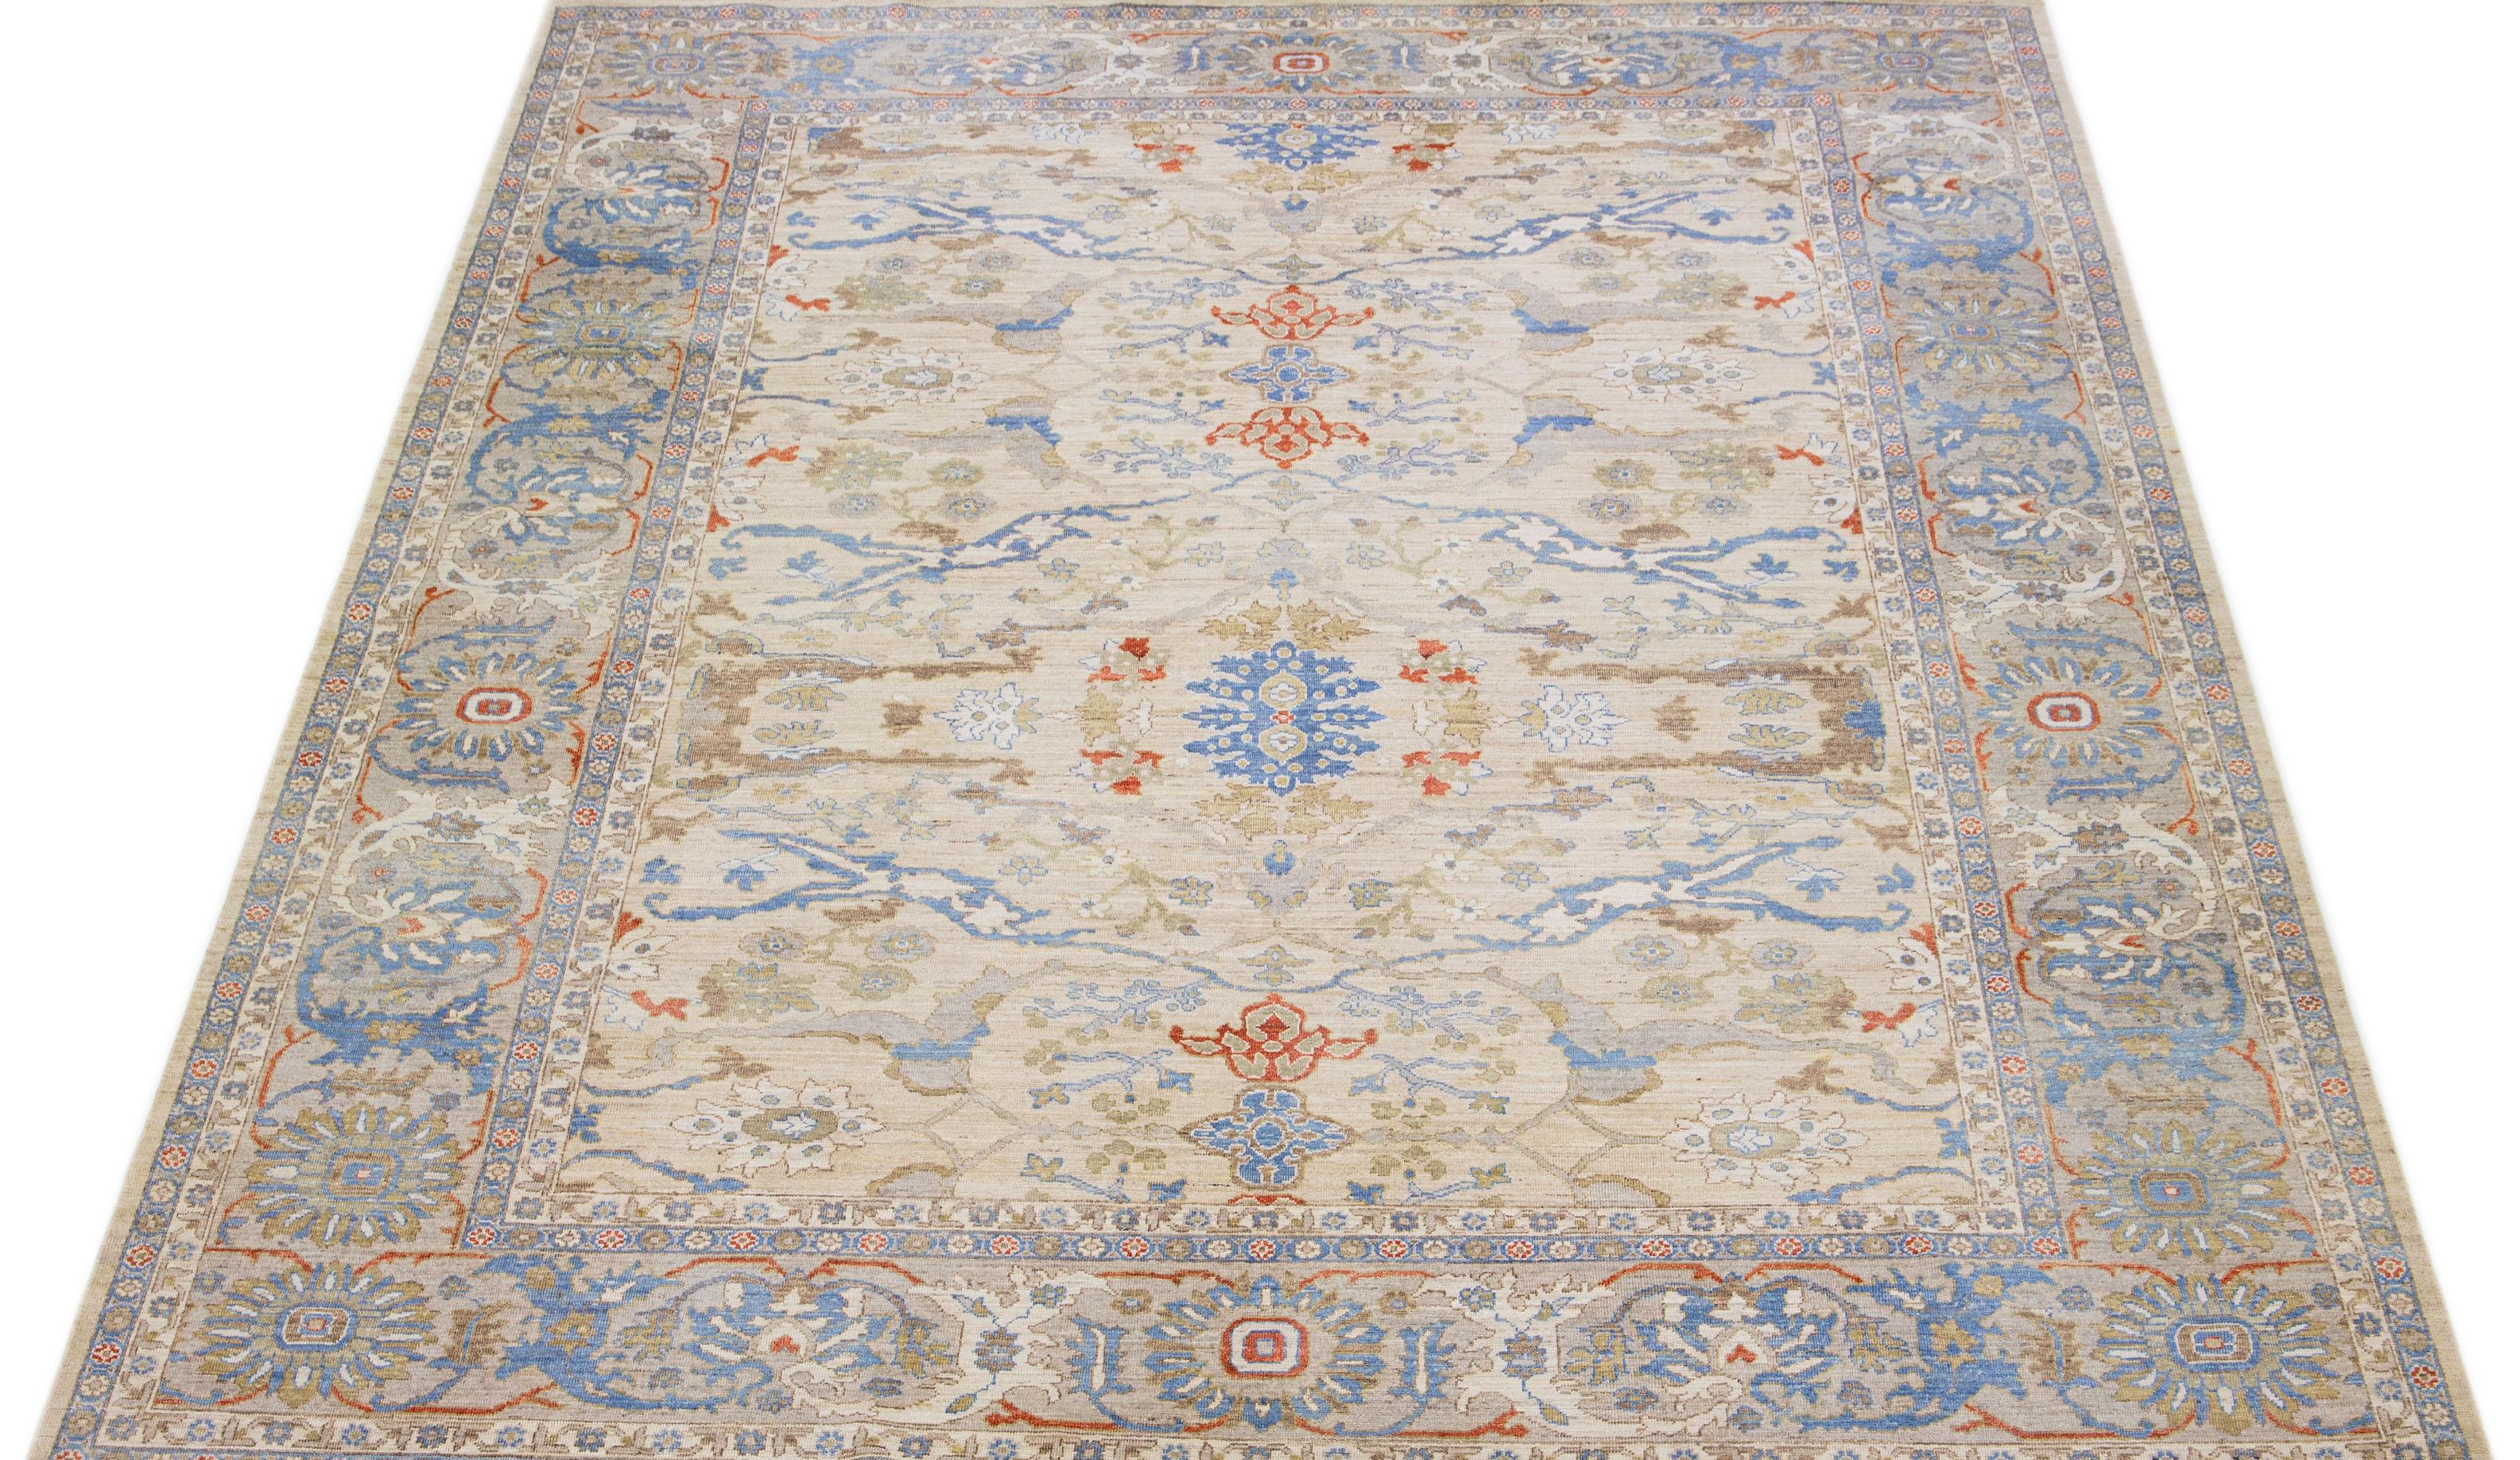 This hand knotted wool rug showcases an exquisite modern Oversize Oushak Style design in a stunning beige color palette. Its intricate frame features captivating accents in rust, blue, and brown hues arranged in a remarkable all-over